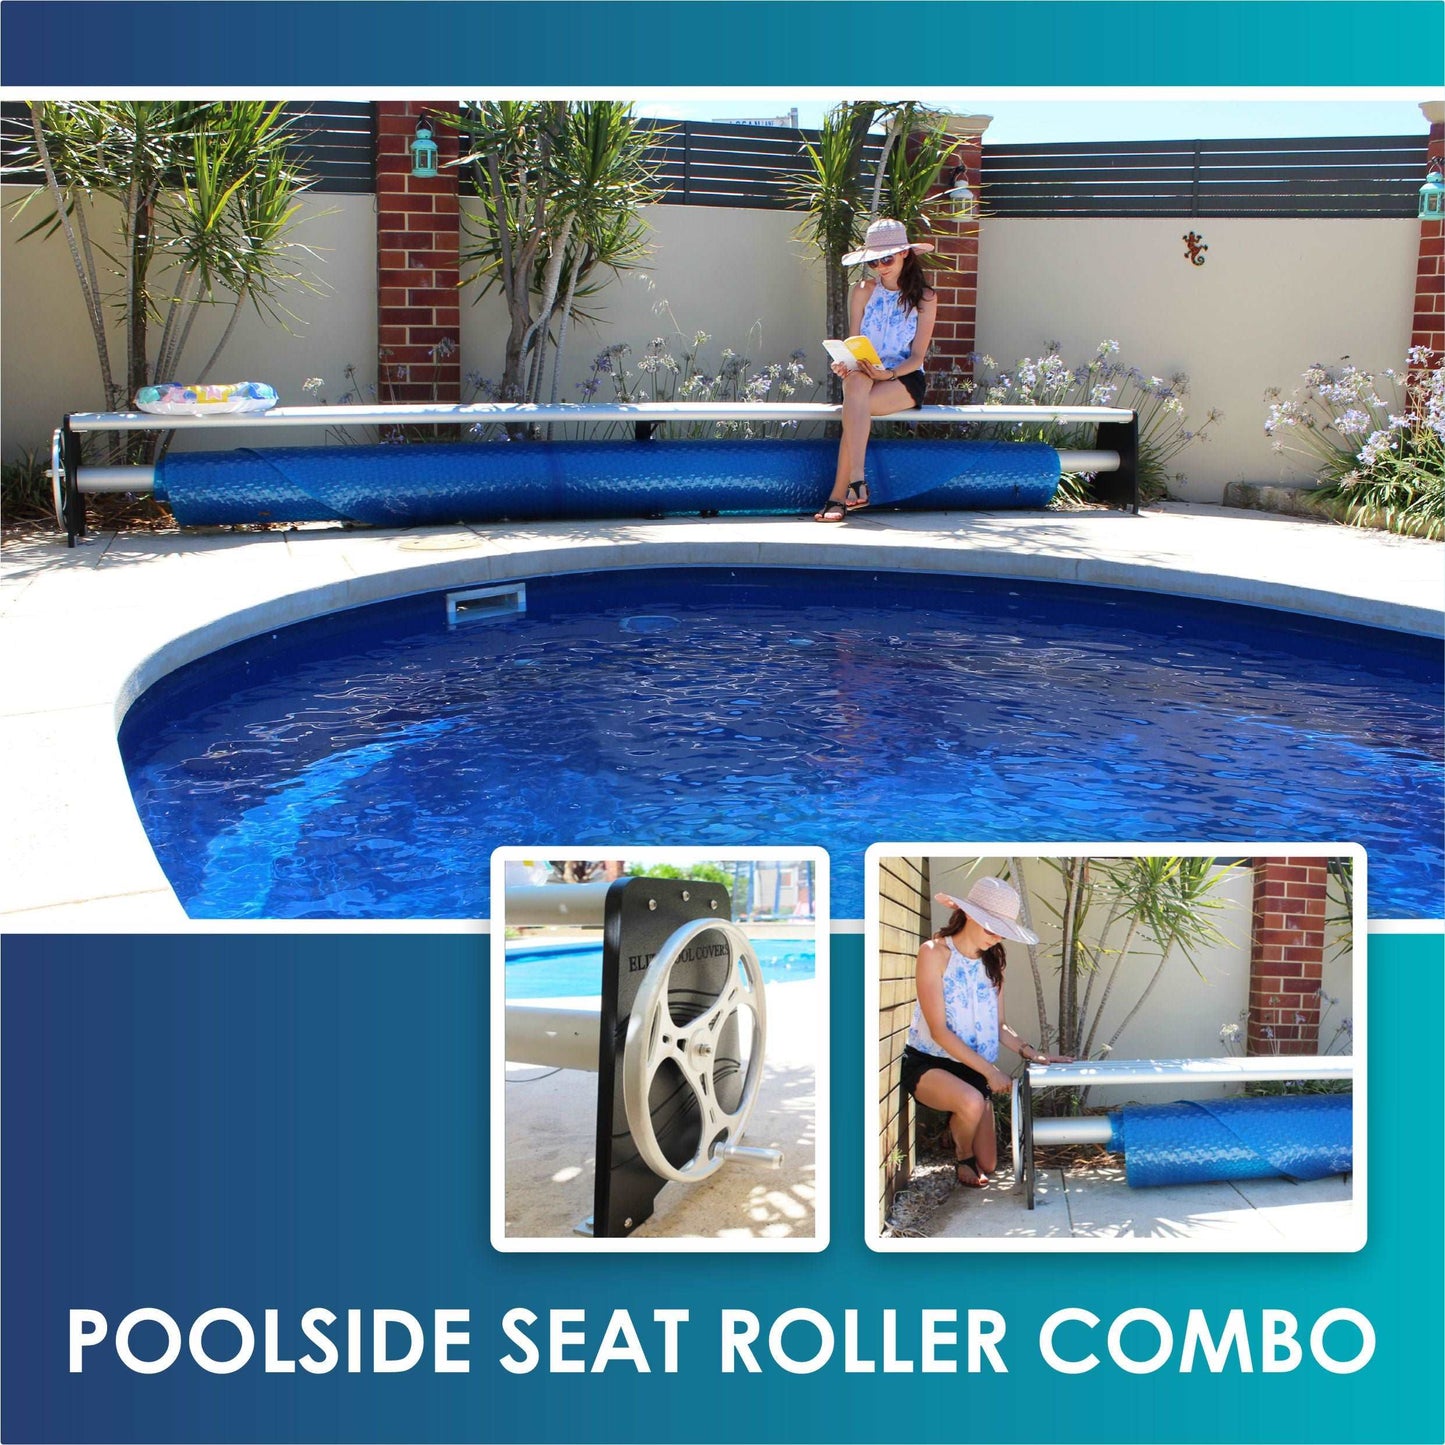 POOL SIDE SEAT ROLLER COMBO